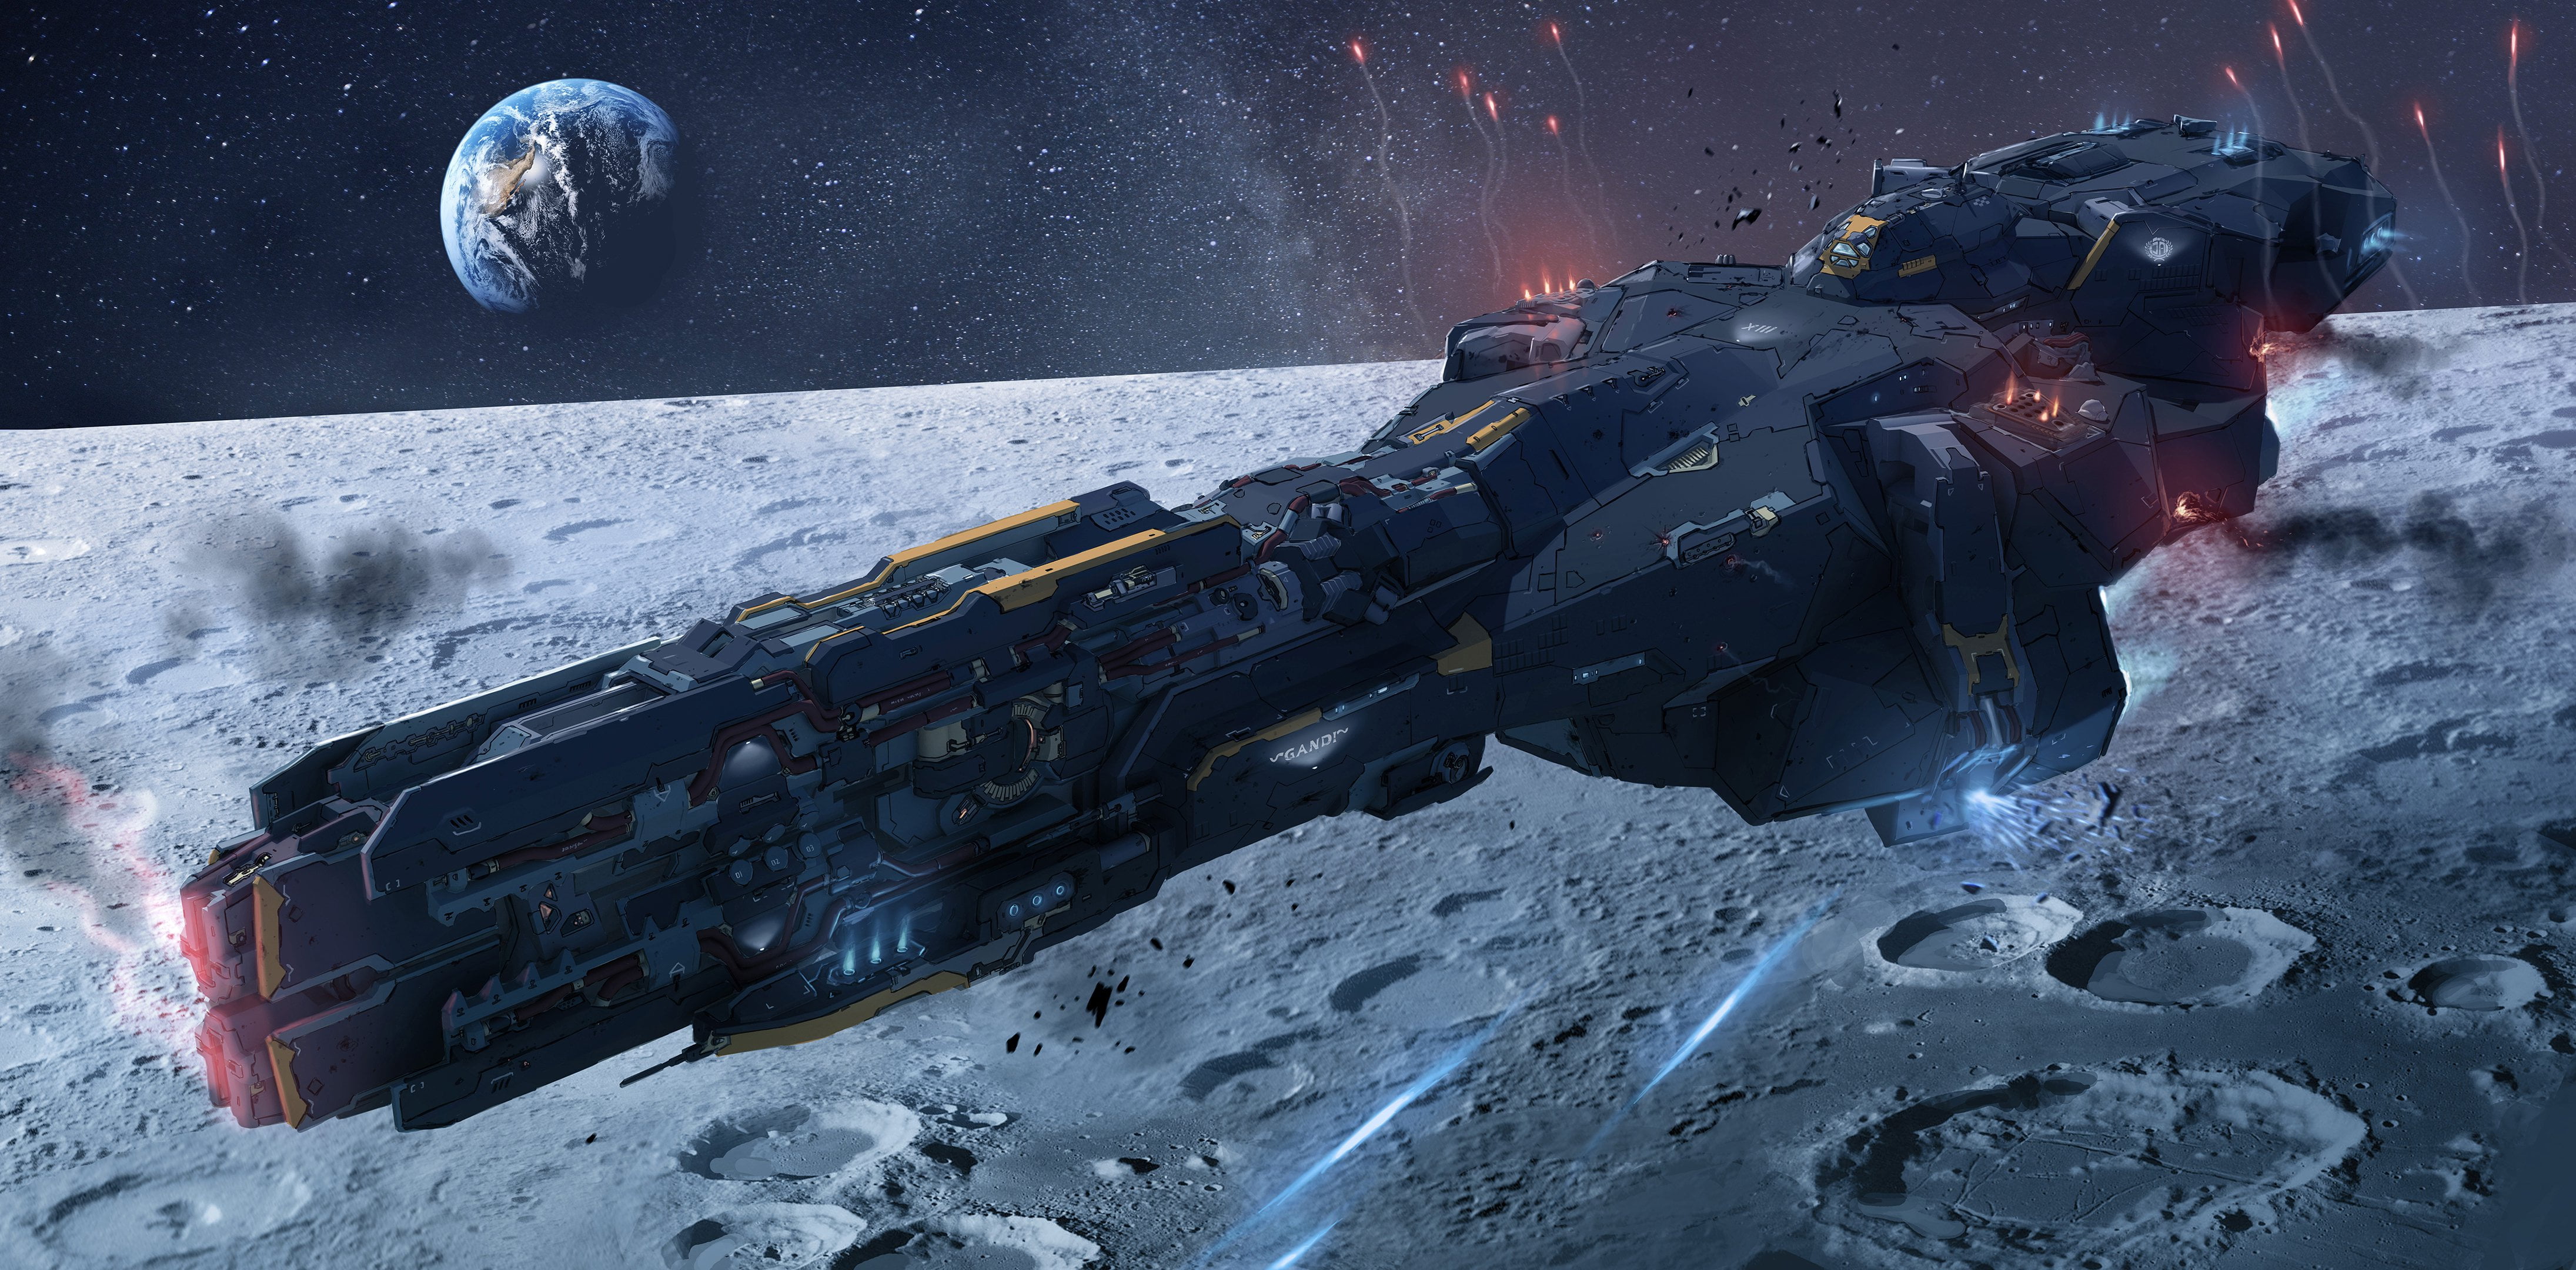 Dreadnought Images.